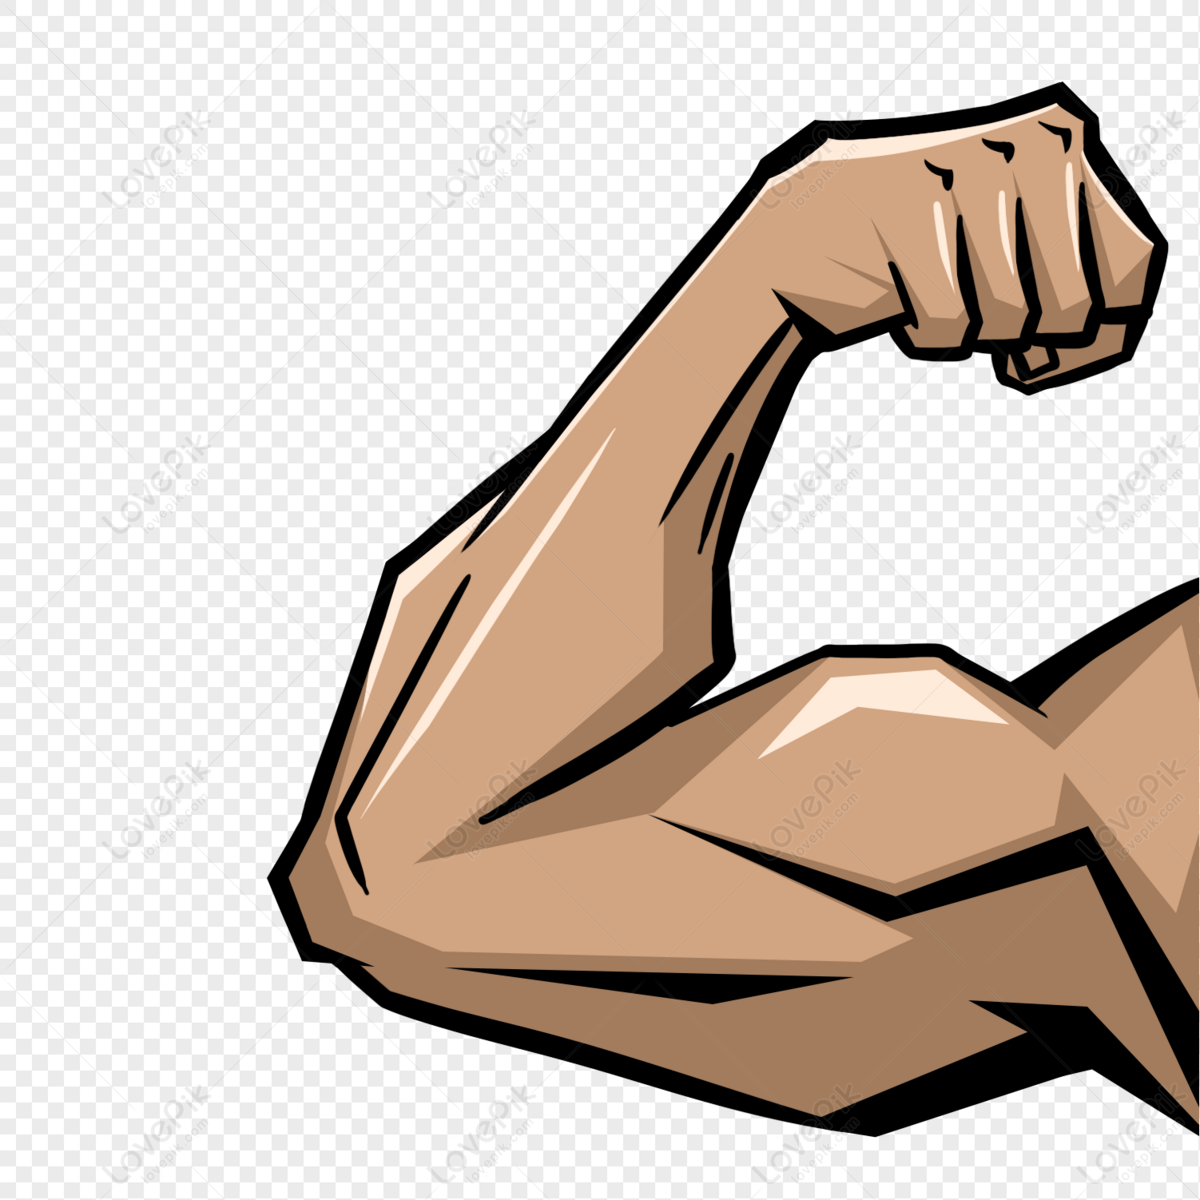 https://img.lovepik.com/free-png/20211118/lovepik-show-two-muscles-png-image_401011809_wh1200.png